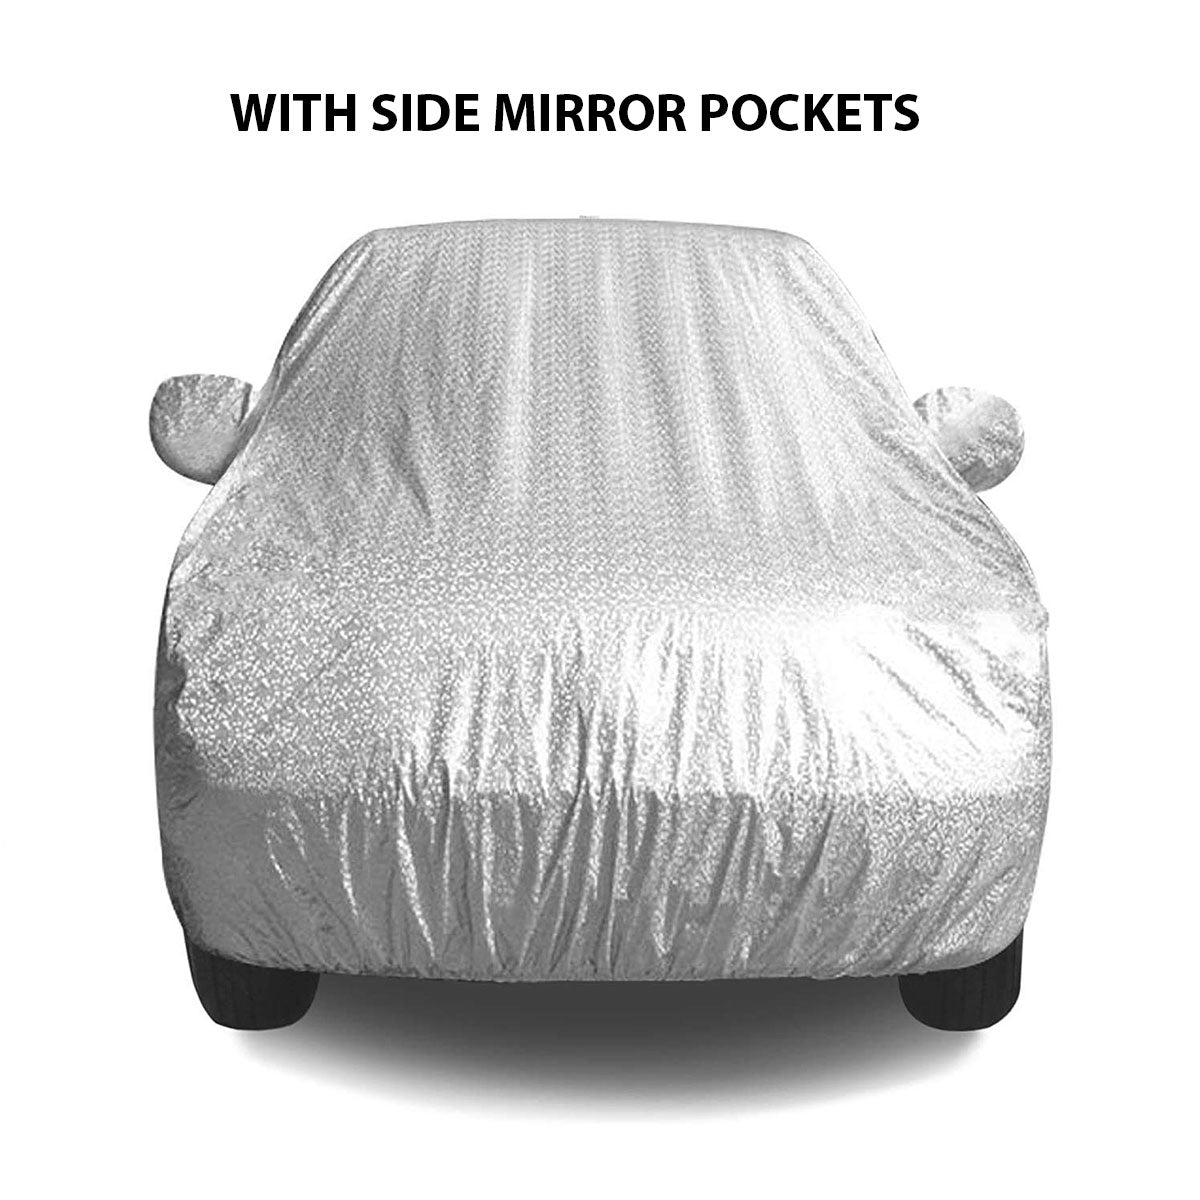 Oshotto Spyro Silver Anti Reflective, dustproof and Water Proof Car Body Cover with Mirror Pockets For Mitsubishi Lancer/Cedia